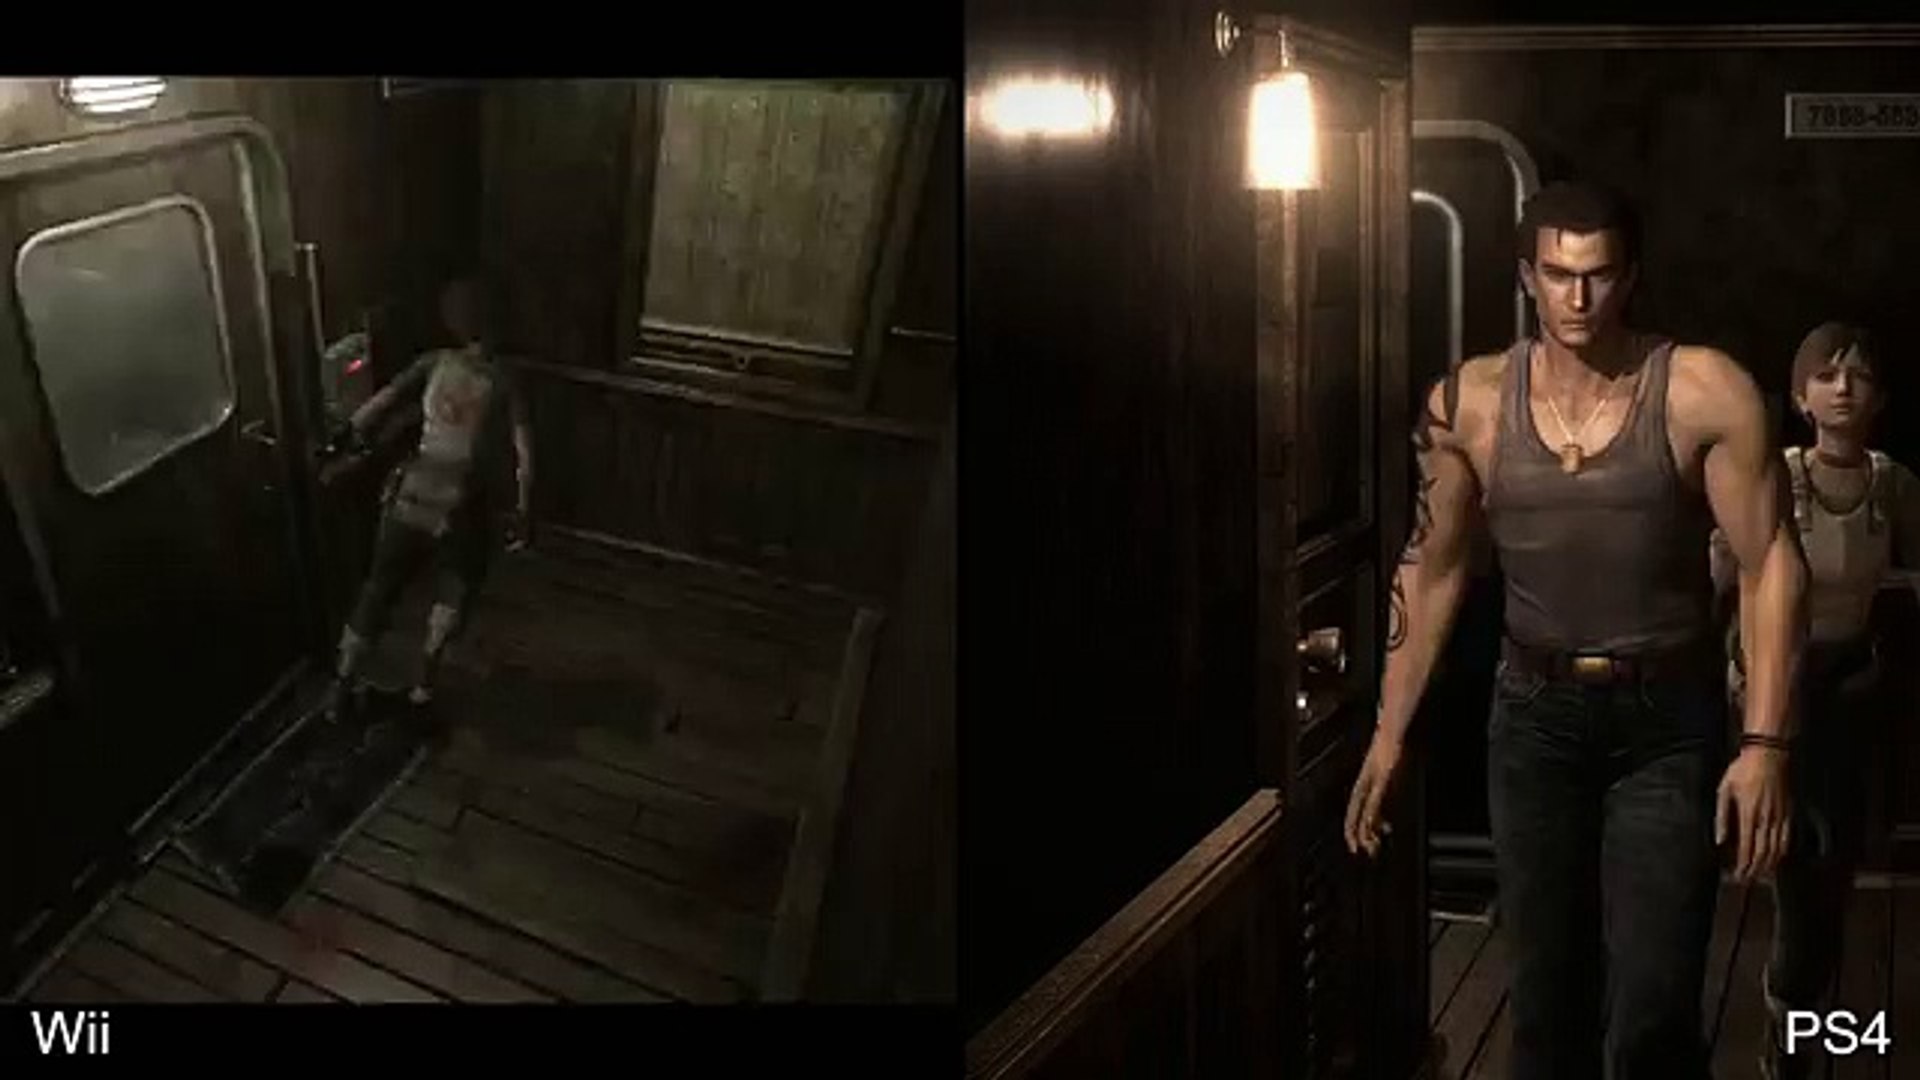 Resident Evil Zero Hd Remaster Ps4 Vs Wii Gamecube Graphics Comparison Video Dailymotion